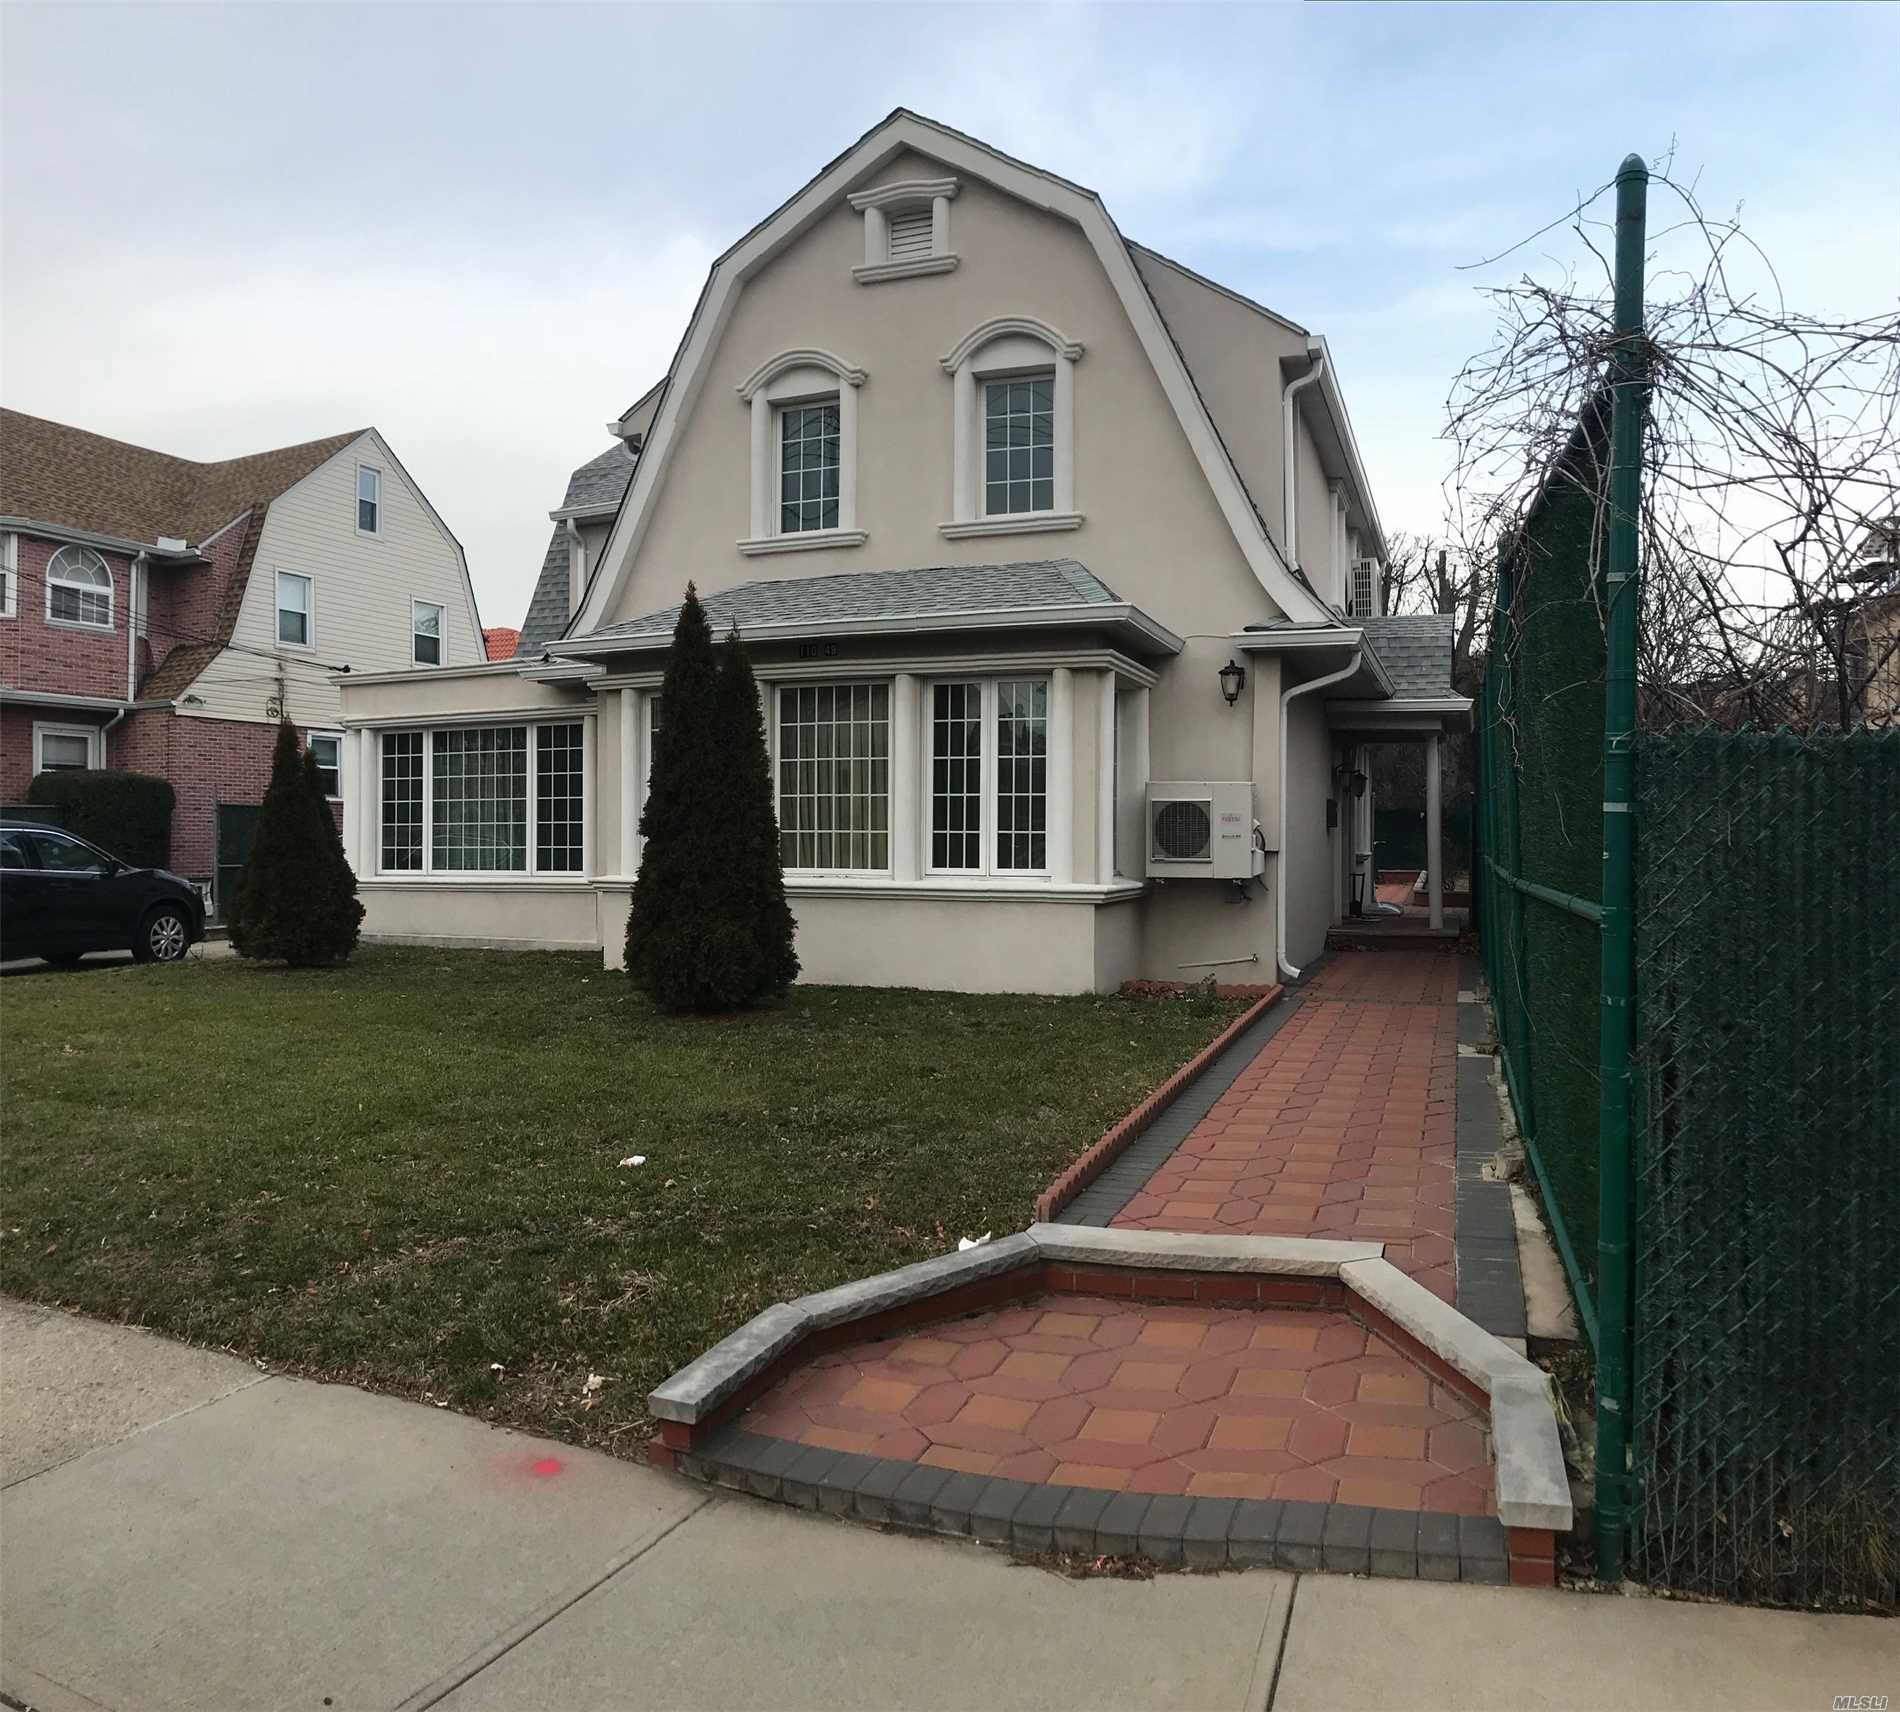 Elegant, All Renovated Single Family House In The Prime Area Of Forest Hills. 50 X 100 Lot House Features A Large Living Room With A Fireplace, Custom Designed Kitchen And Bathrooms, Beautiful Hardwood Floors, Fully Finished Basement With Sauna, Large Backyard And Detached Garage. Excellent Location, Close To Transportation, Shops, Schools.